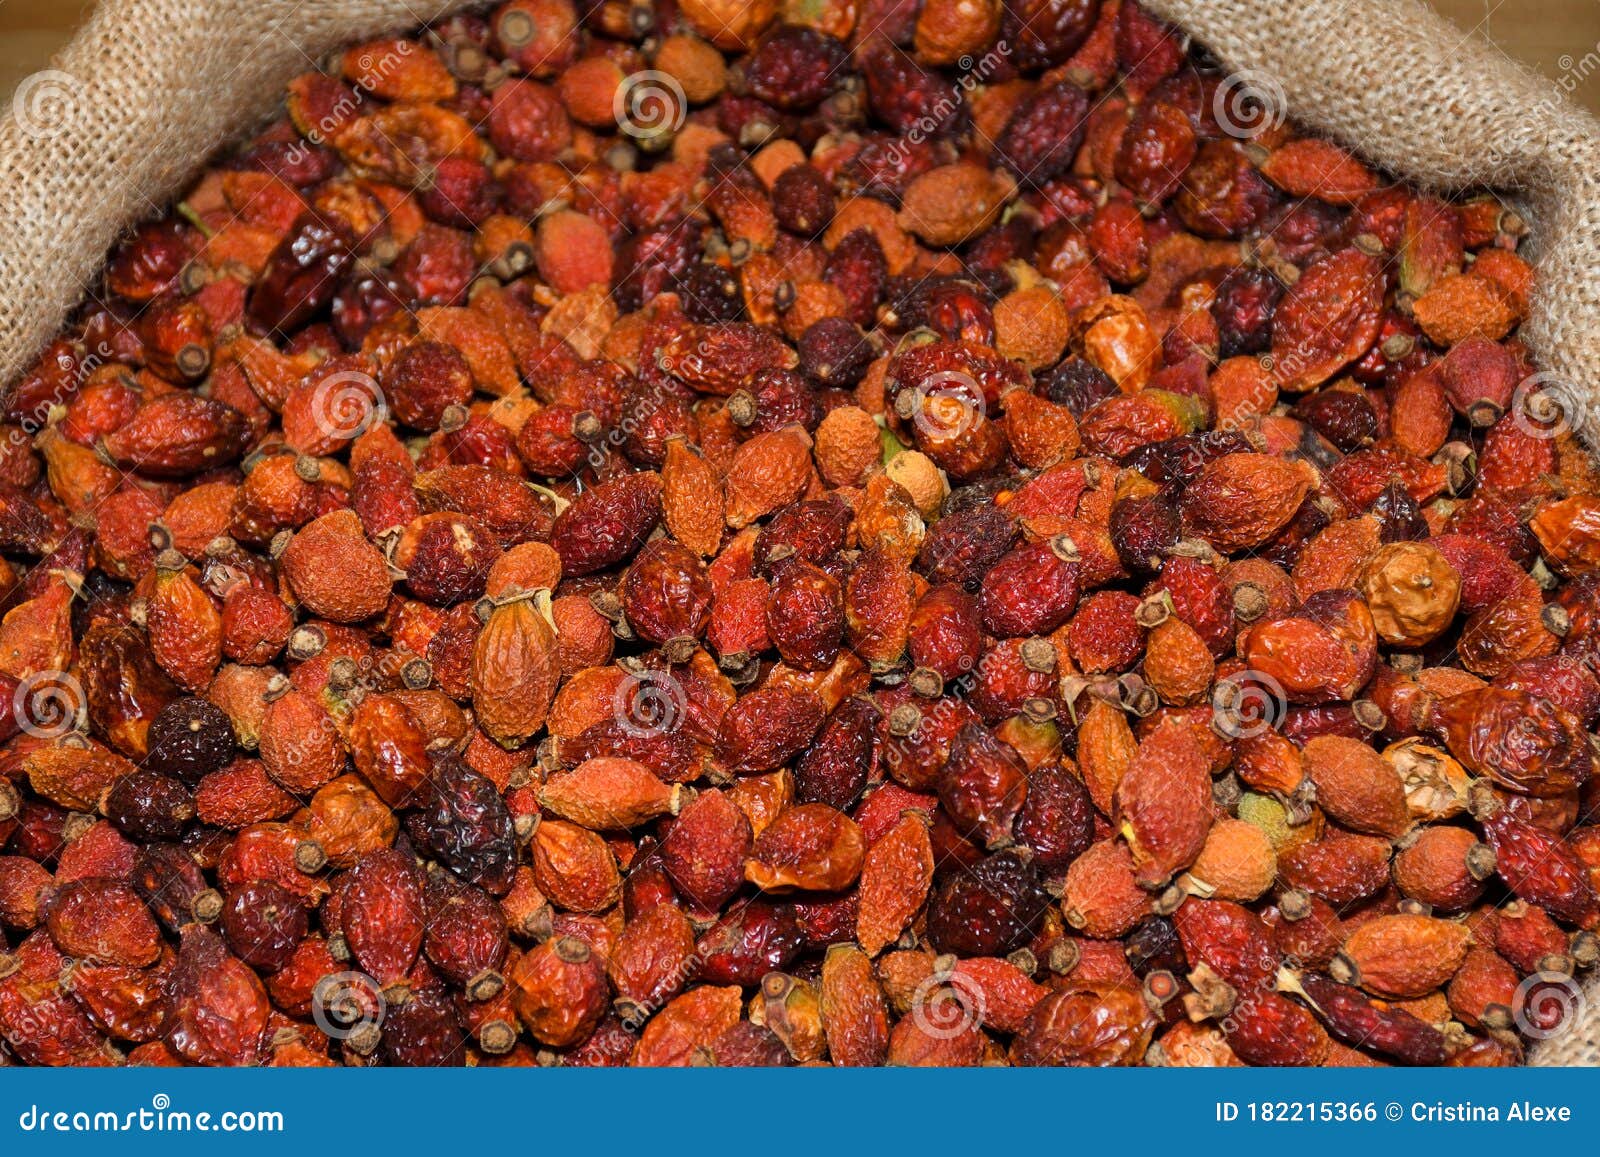 dried rose hip or rosehip, also called rose haw and rose hep, is the accessory fruit of the rose plant